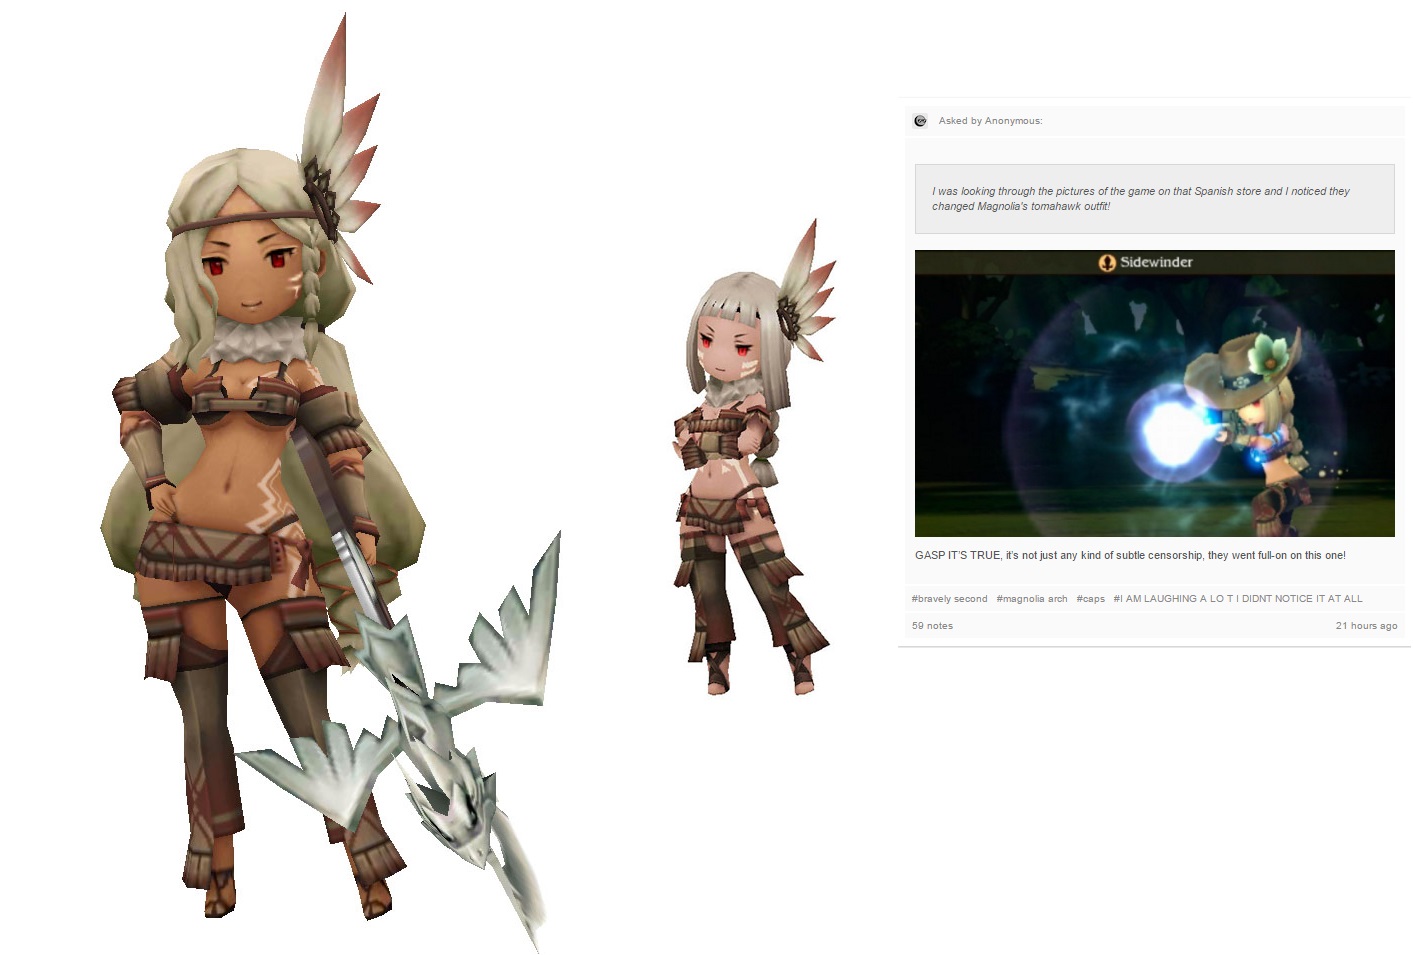 RUMOR - Bravely Second swaps out 'Tomahawk' class for 'Cowbo...